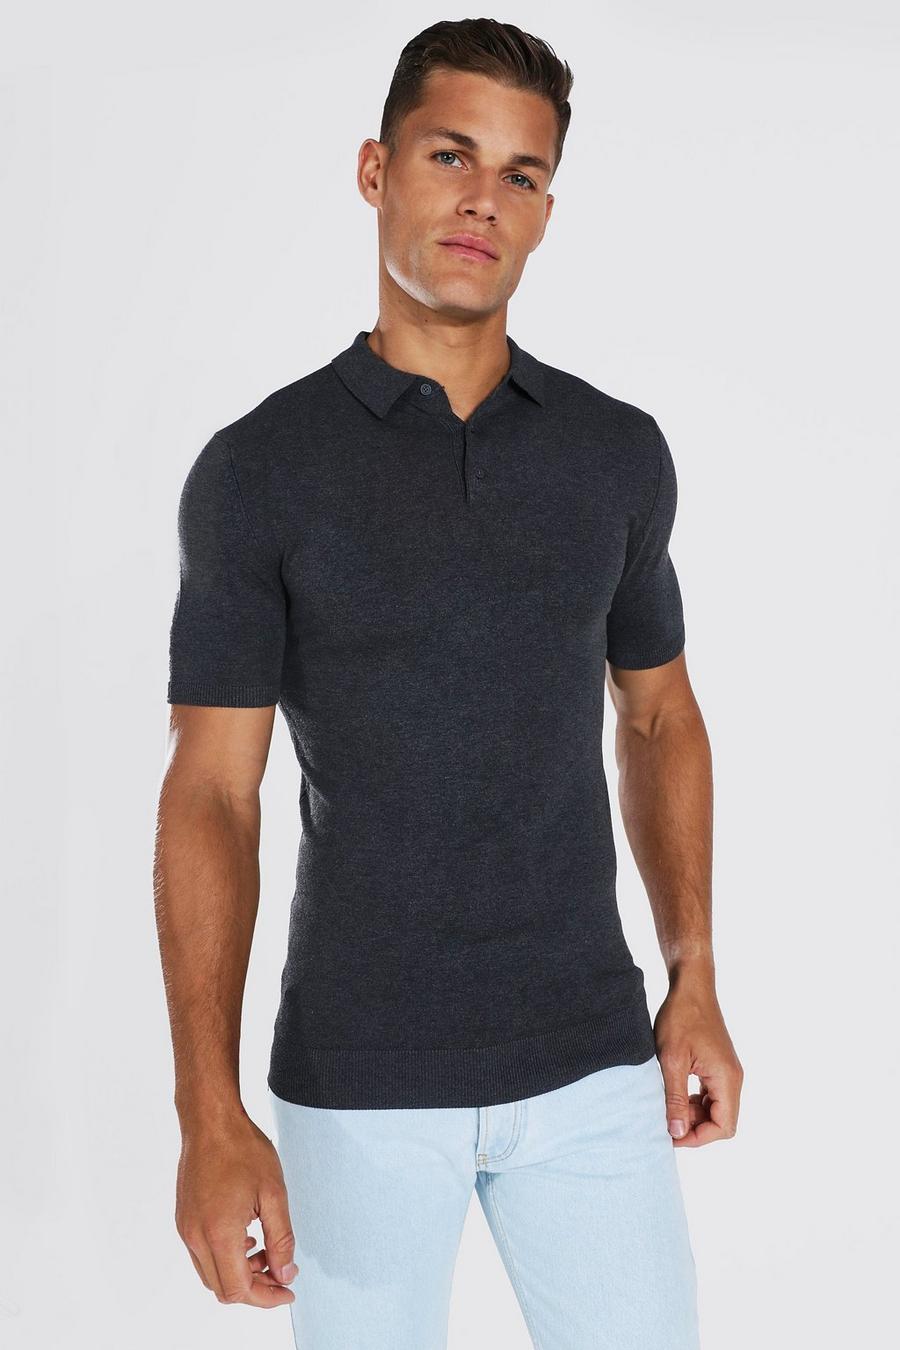 Charcoal grigio Tall Muscle Fit Knitted Polo